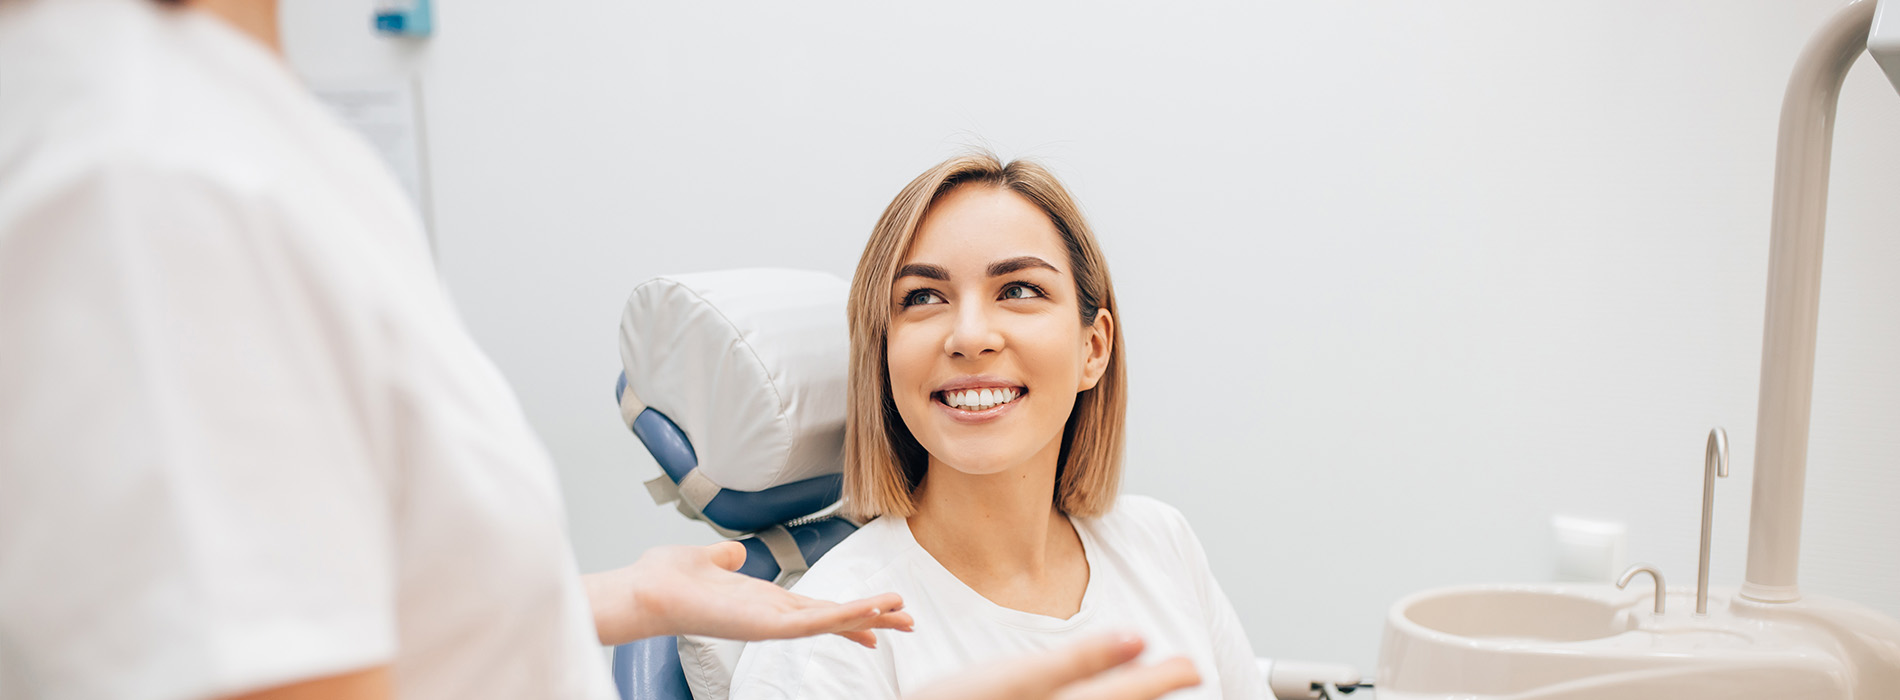 Dental Services in Shelby Township MI